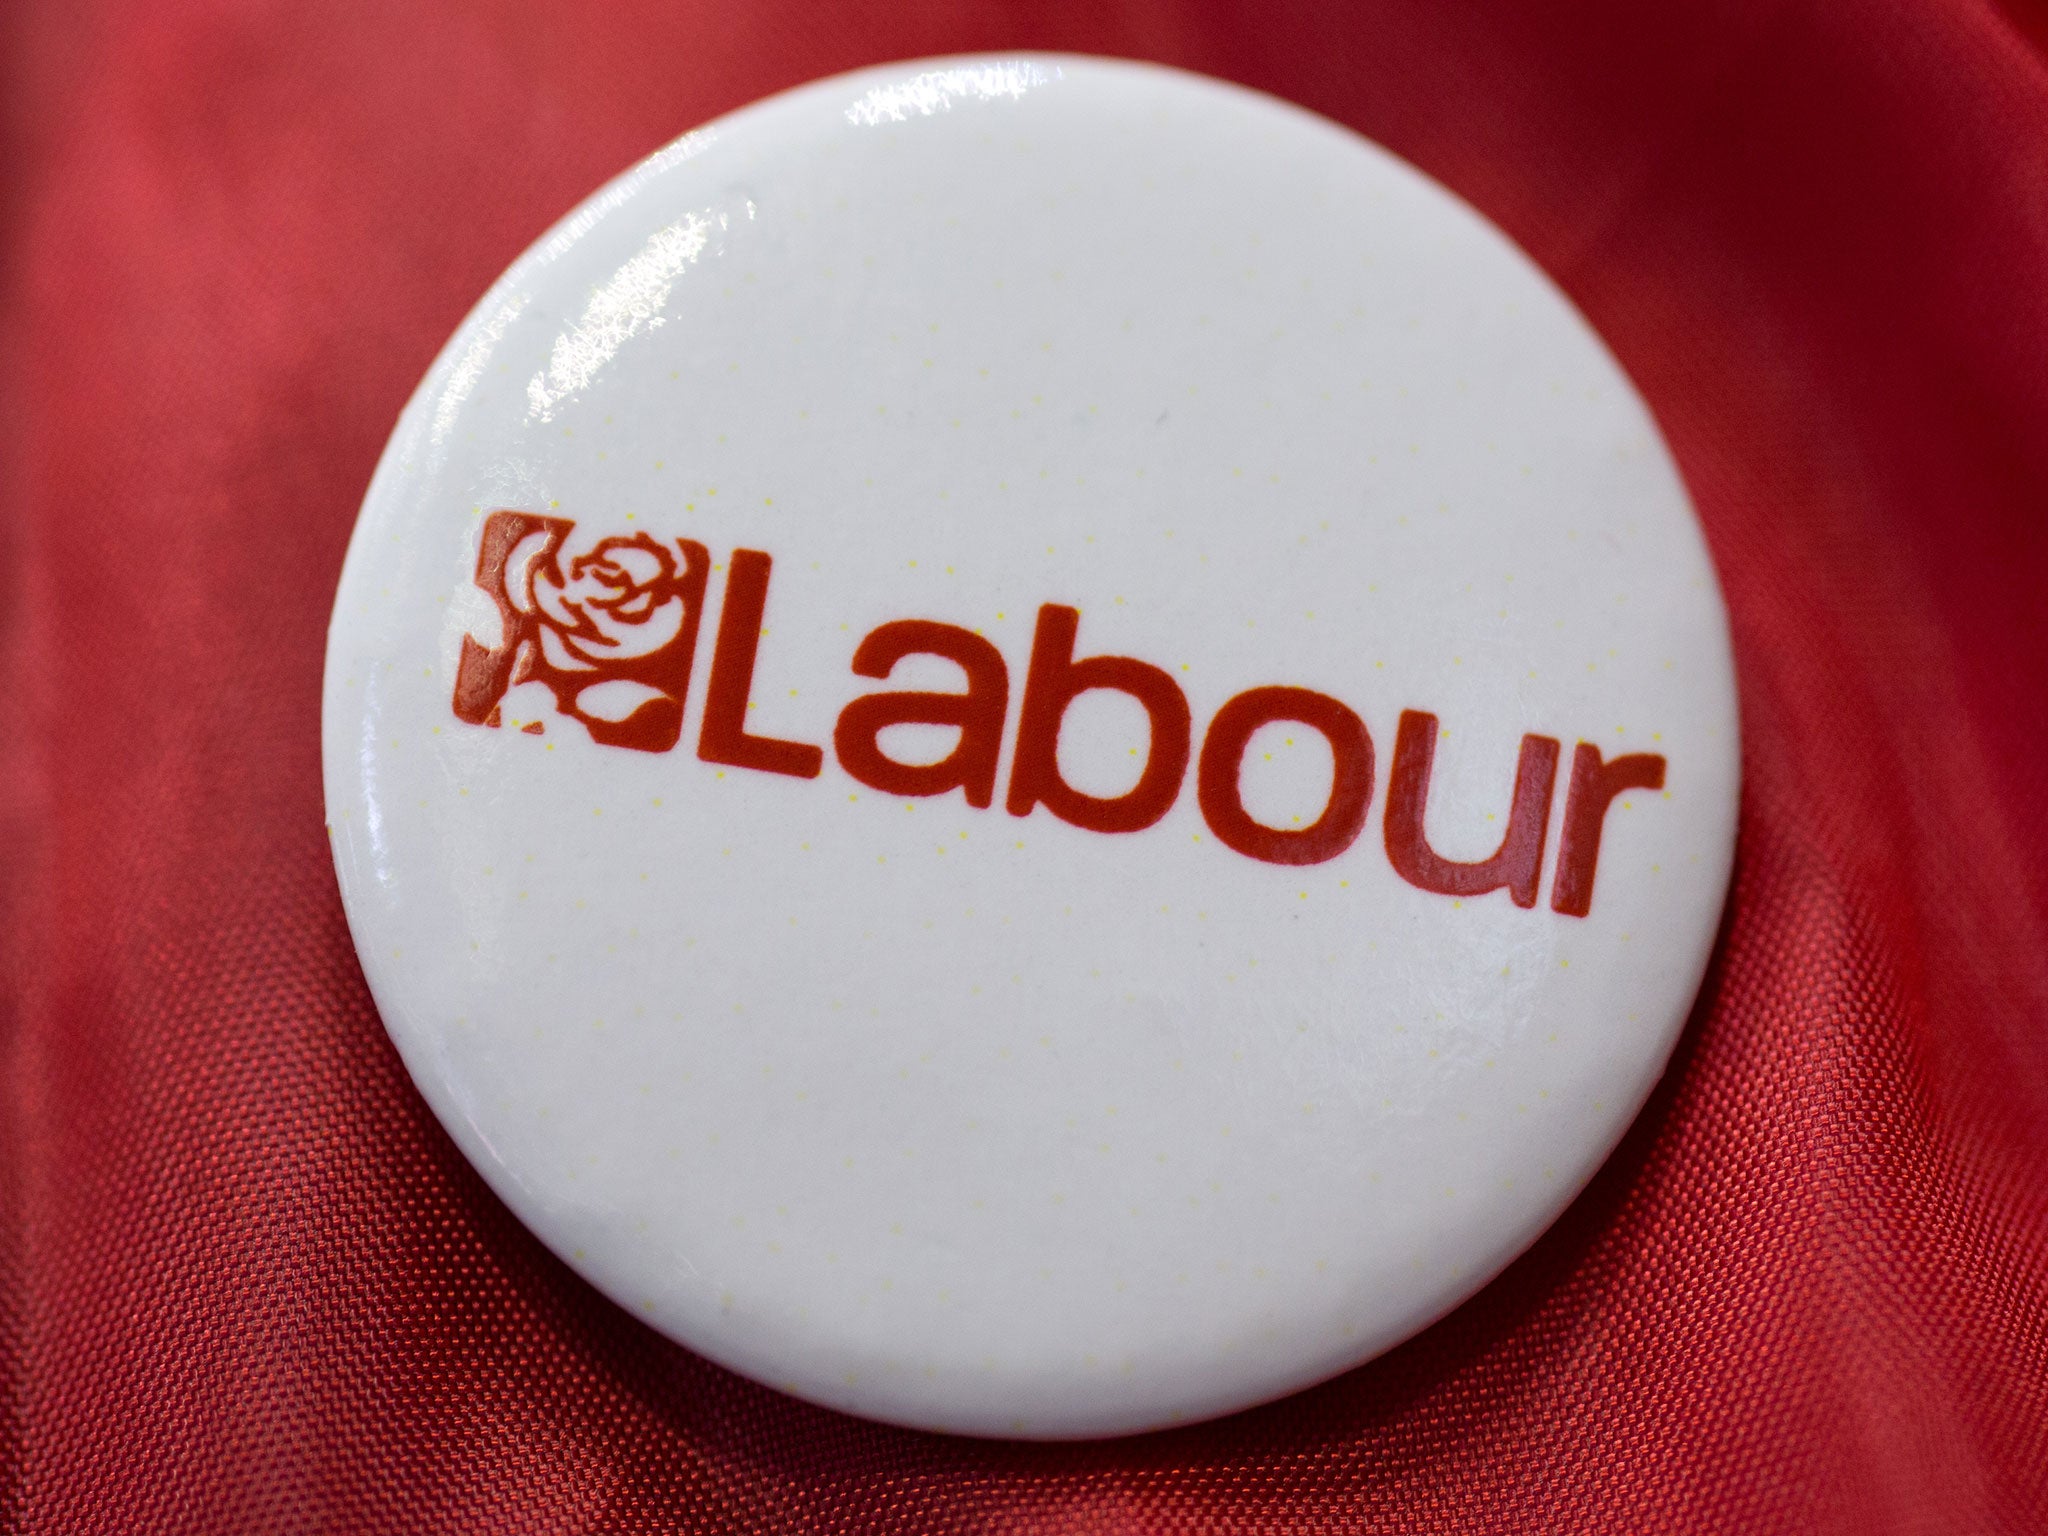 Labour has hired a self-employed betting expert to be its general election data guru